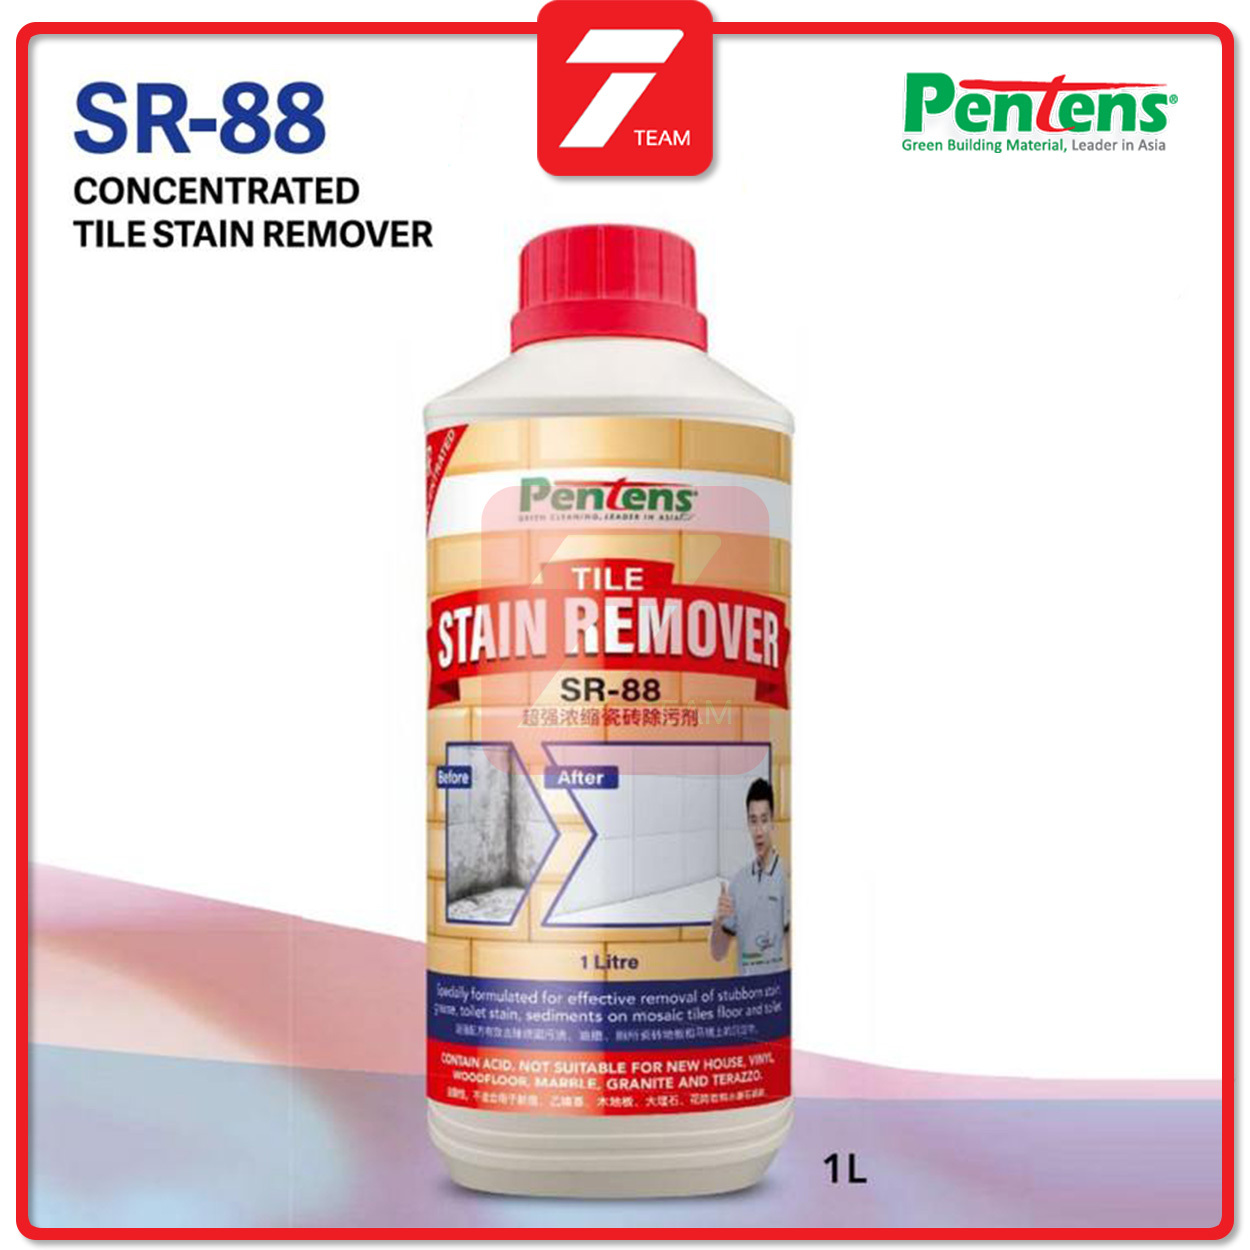 Pentens SR-88 Concentrated Tile Stain Remover 1L